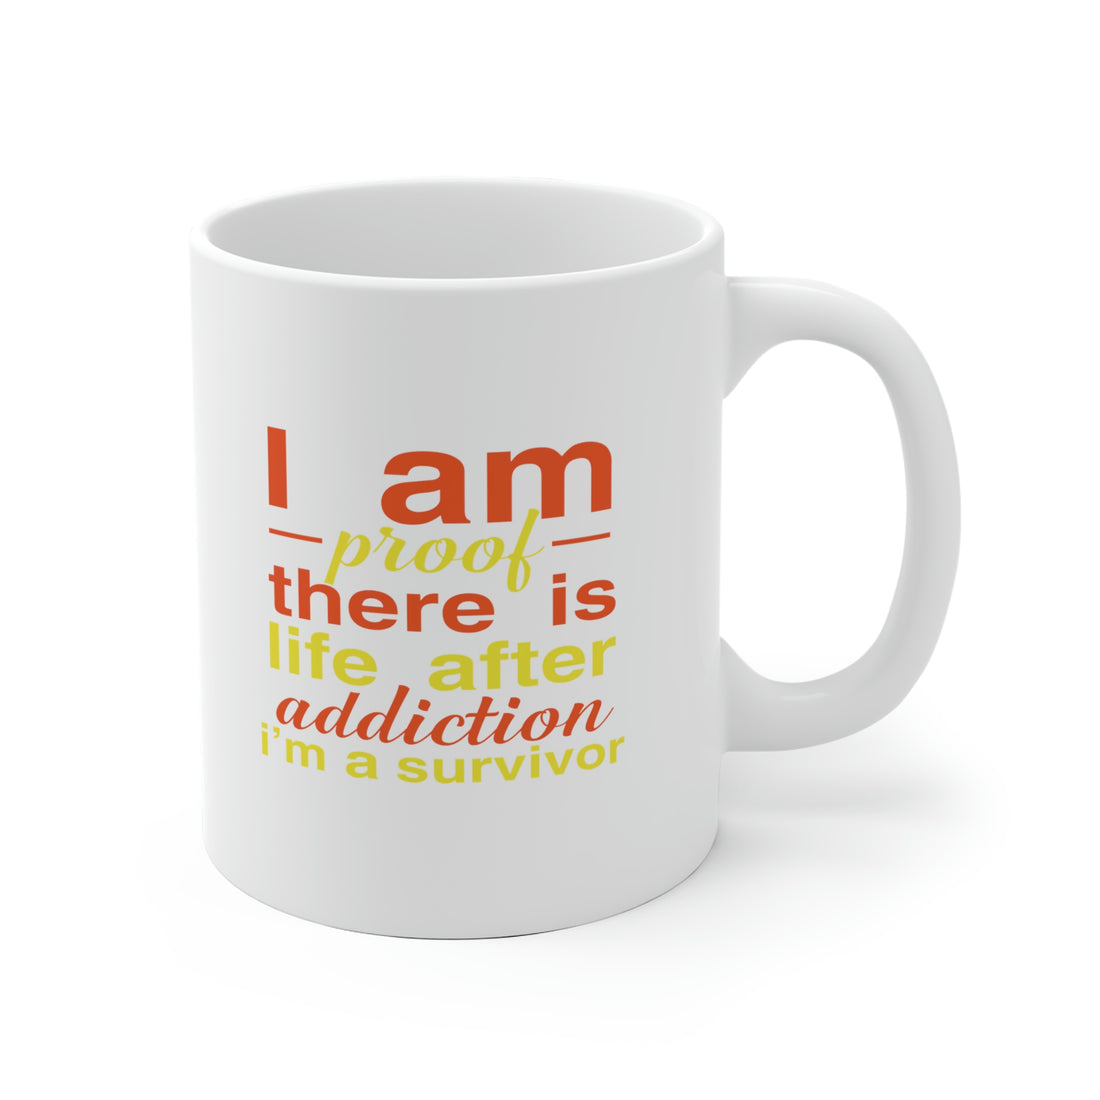 I Am Proof There Is Life After Addiction - White Ceramic Mug 2 sizes Available